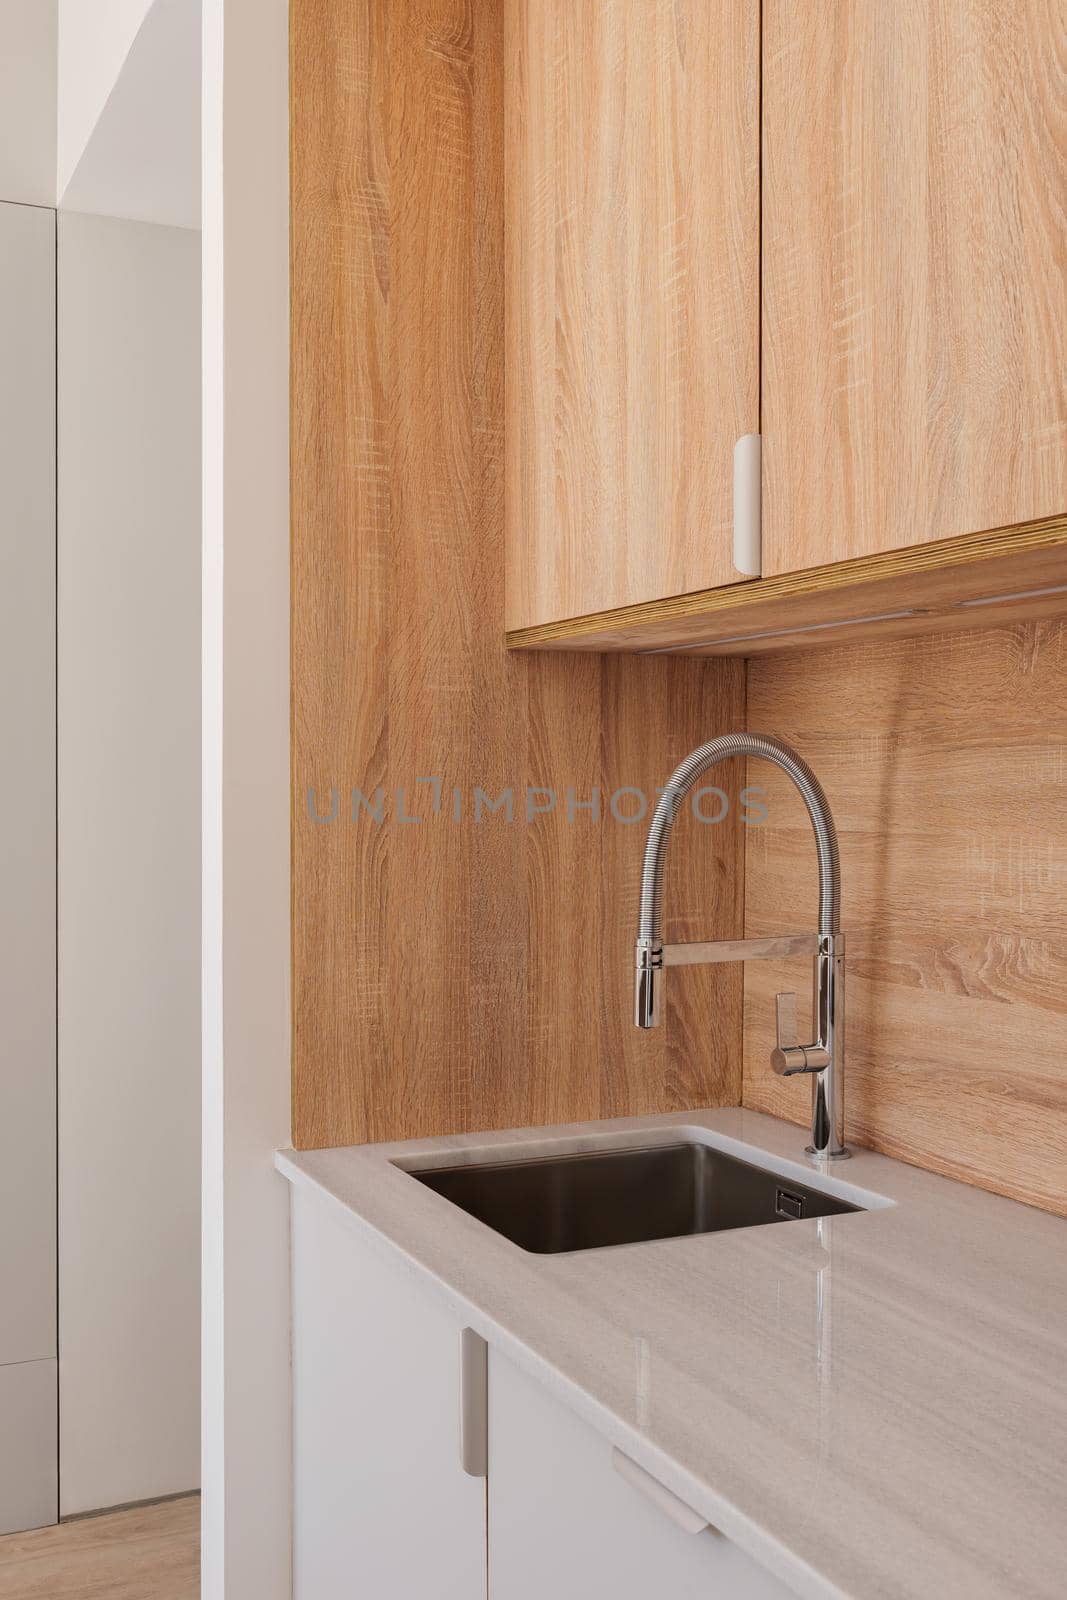 Modern faucet and sink in elegant kitchen with wooden cabinets. Minimalist style interior in refurbished apartment. by apavlin